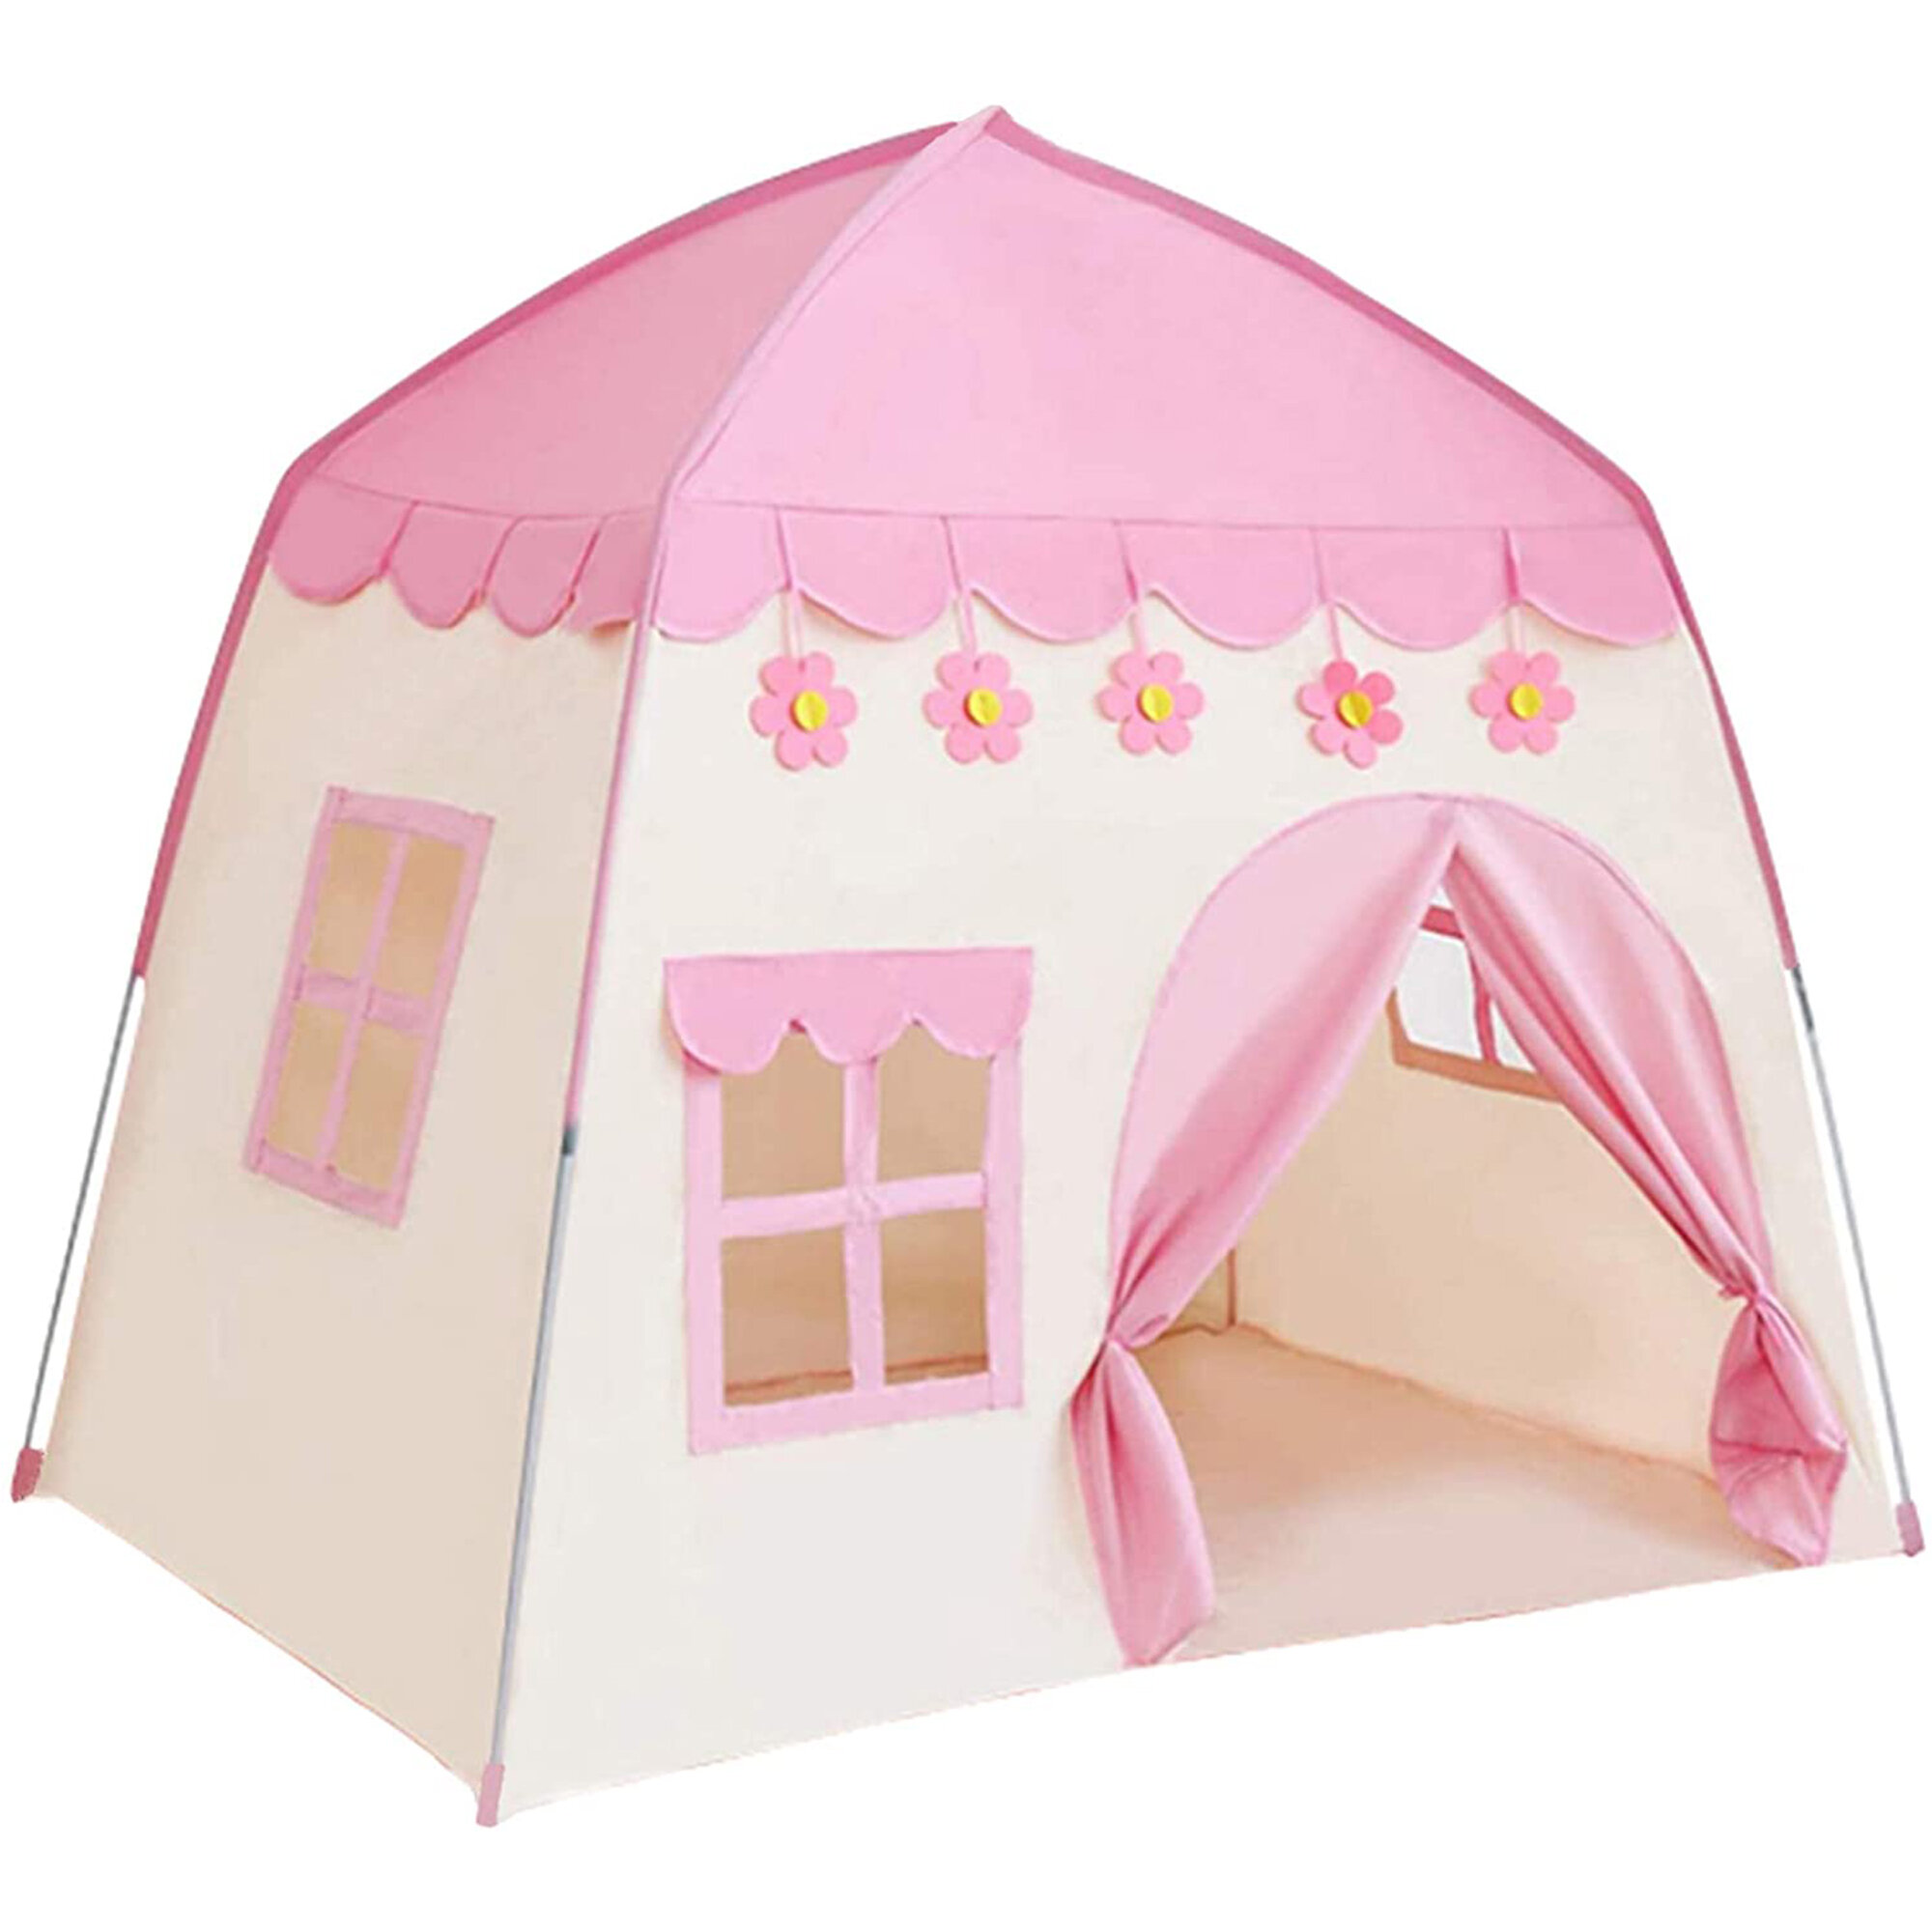 Girls Princess Castle Playhouse Children Kids Play Tent In/Outdoor Toys Pink 